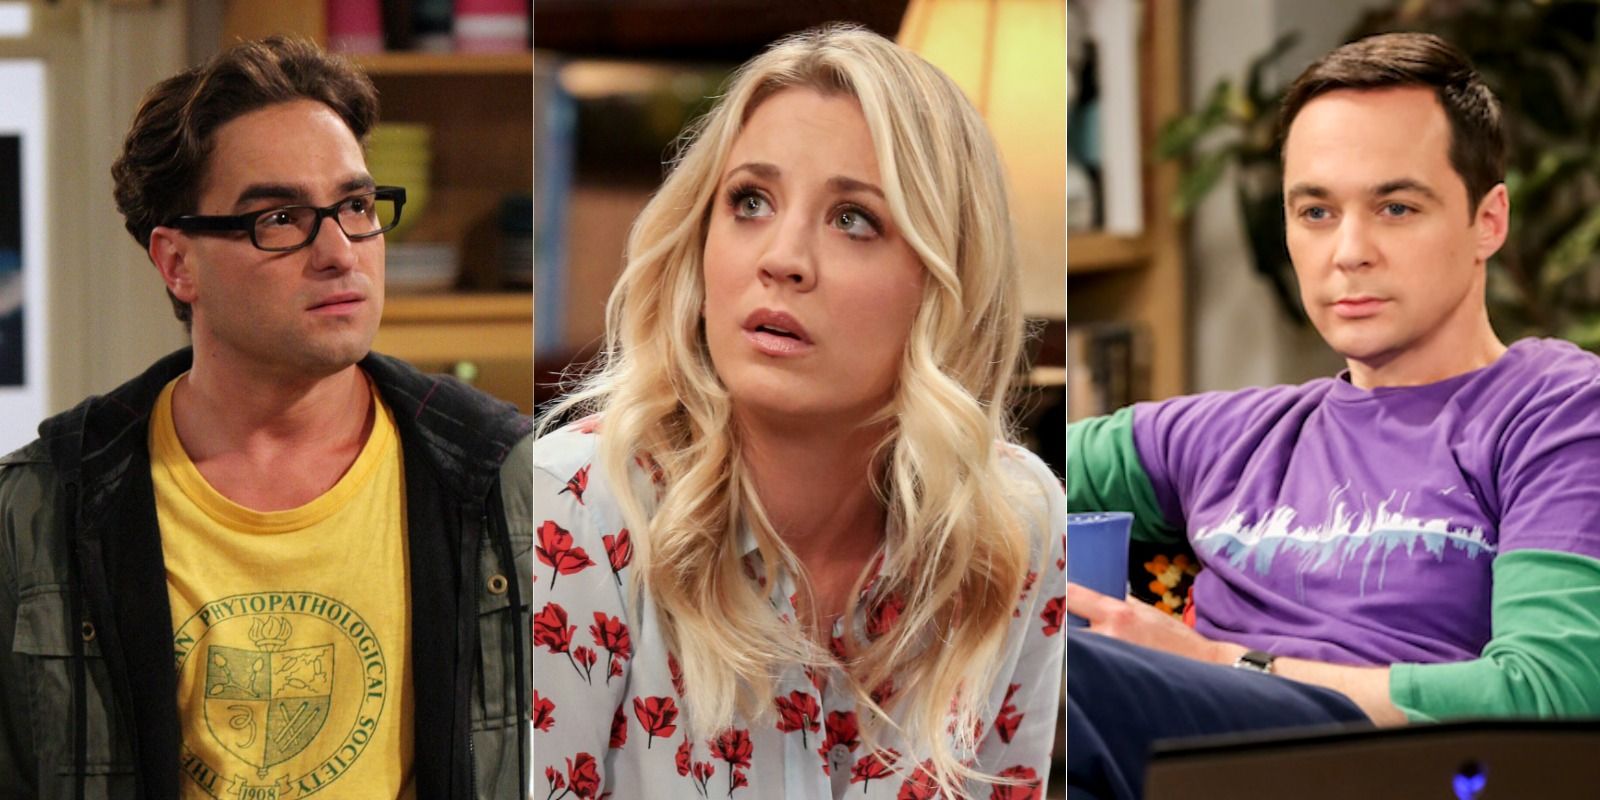 A split image of Leonard, Penny, and Sheldon in The Big Bang Theory